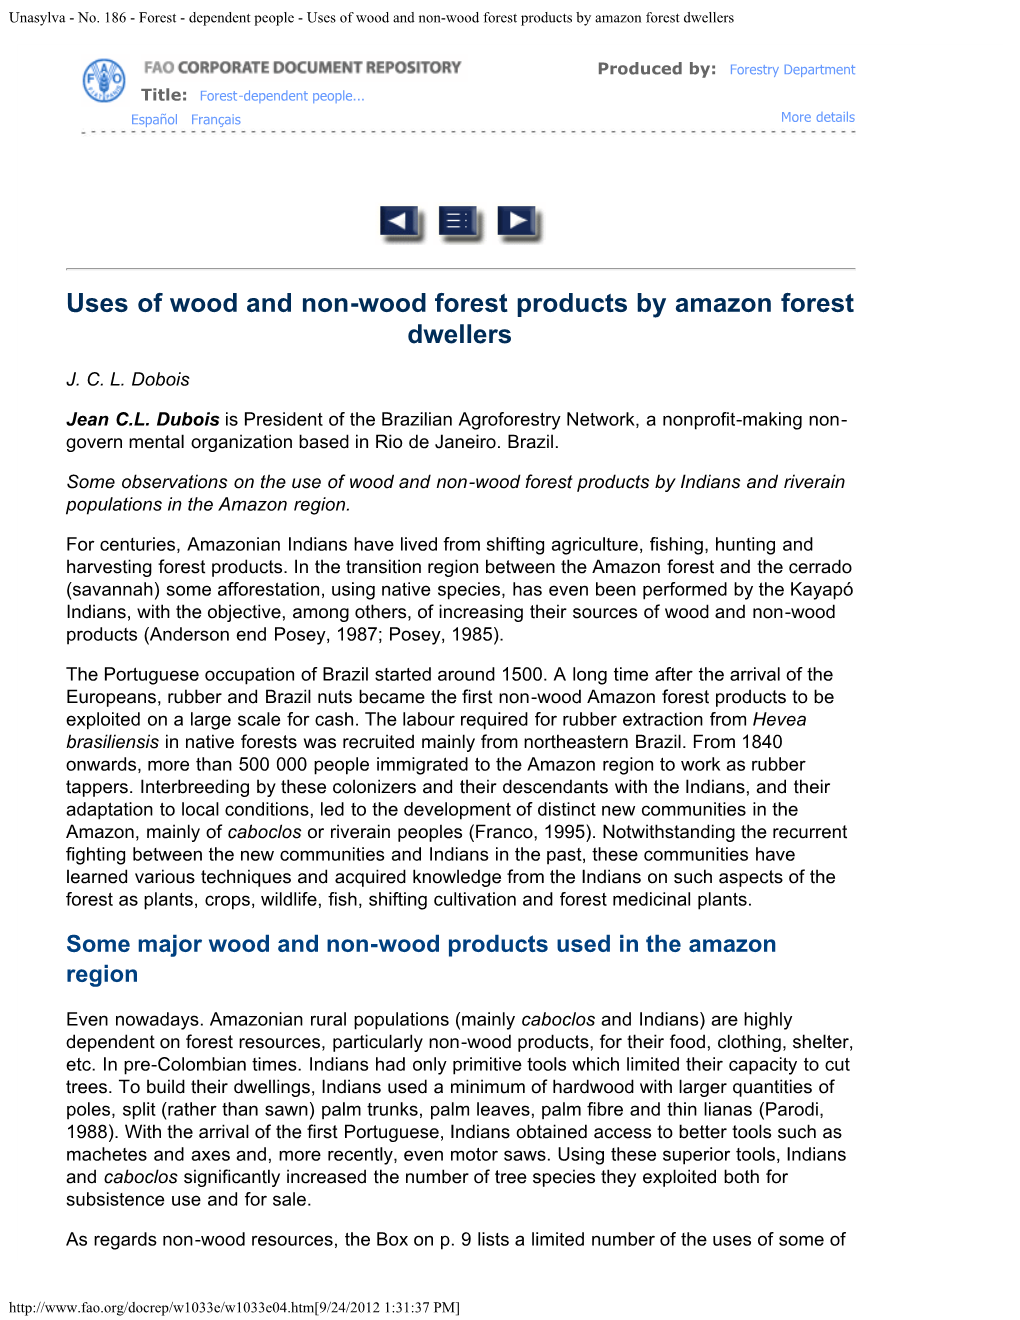 Uses of Wood and Non-Wood Forest Products by Amazon Forest Dwellers